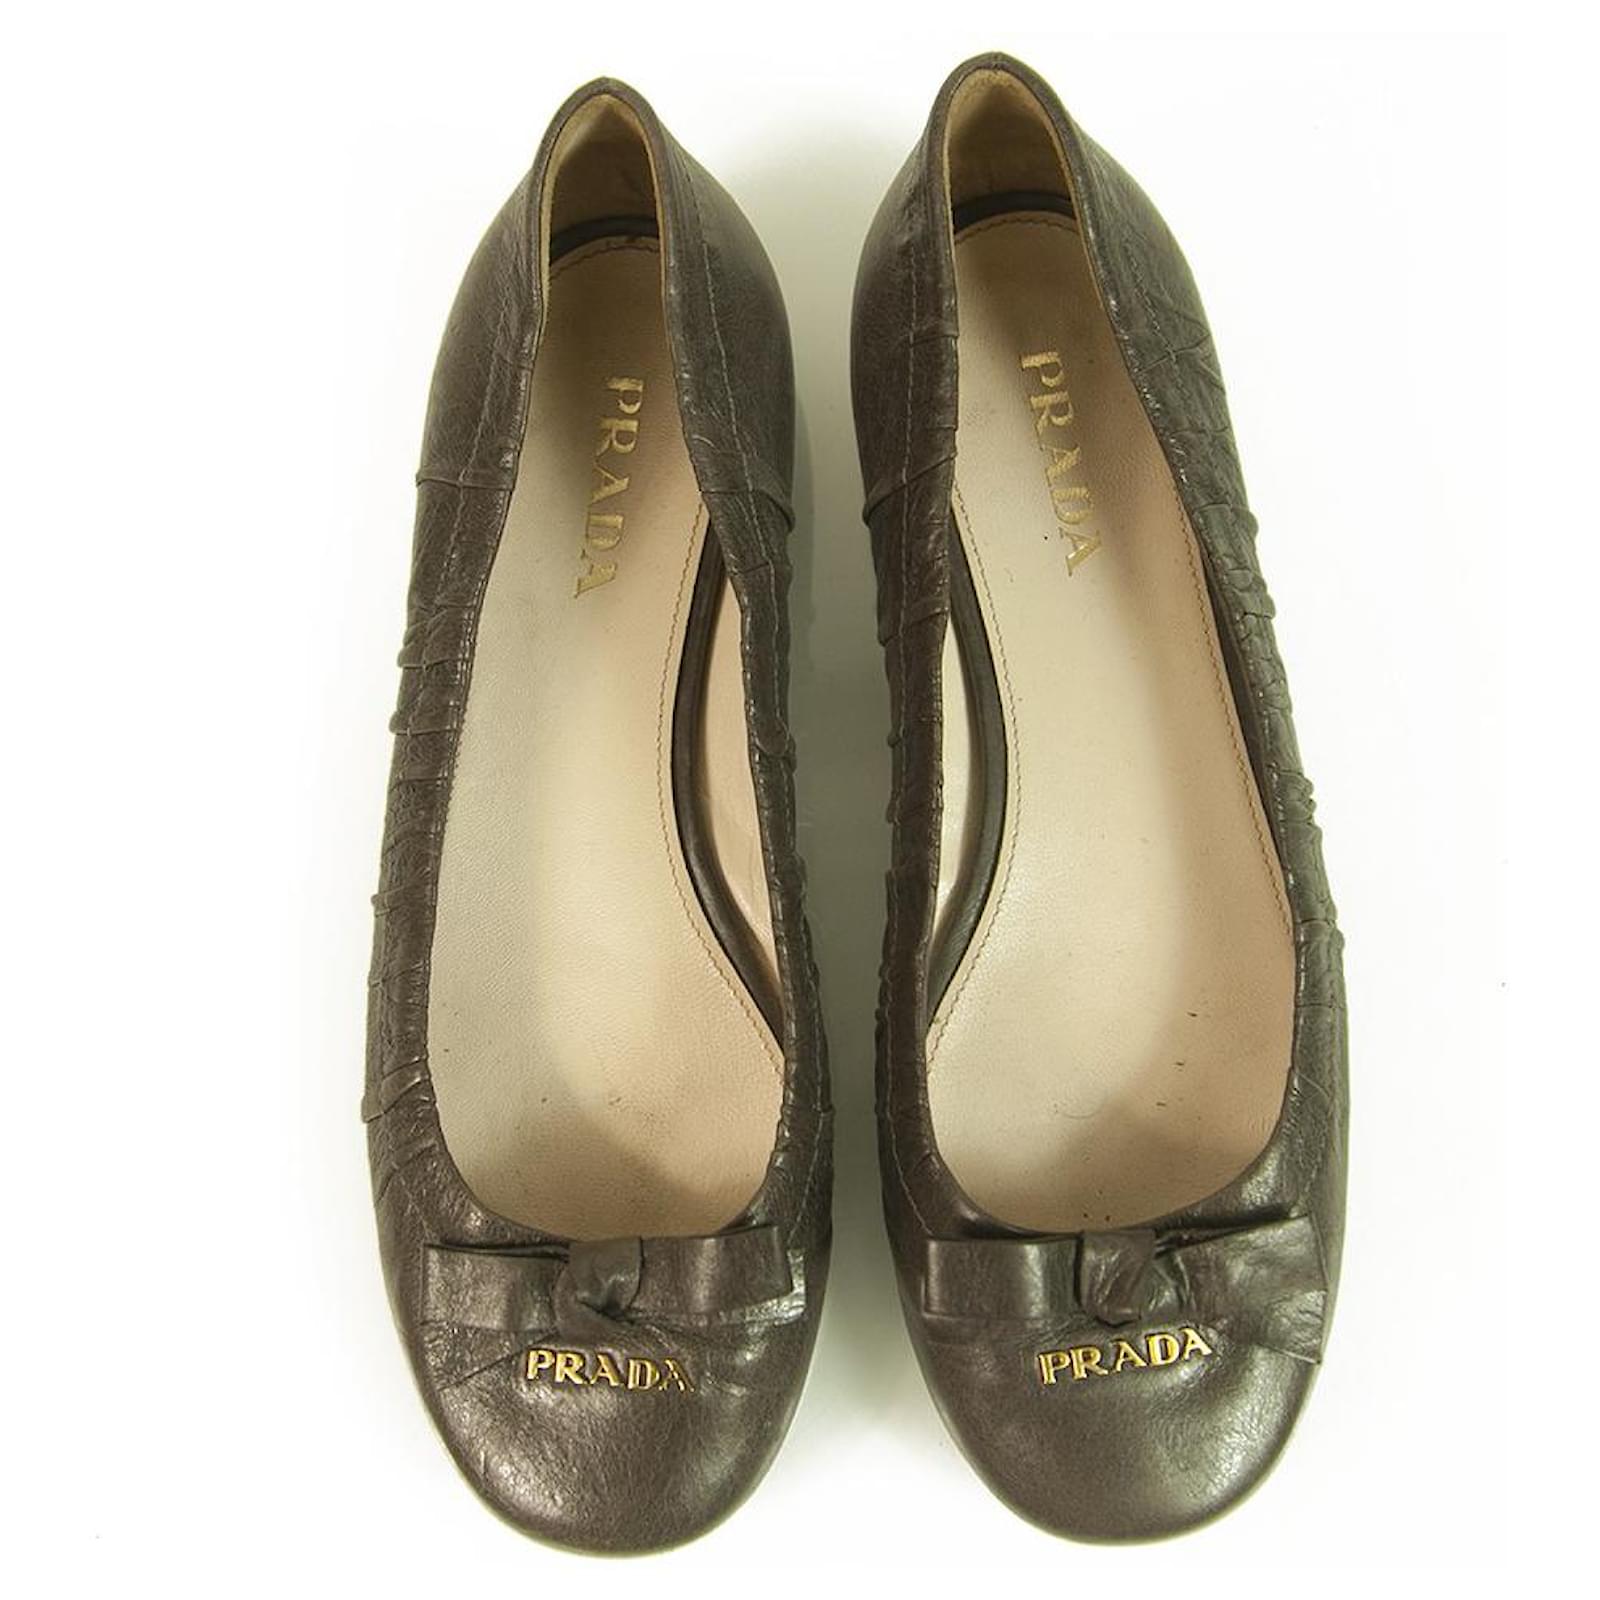 PRADA Taupe Leather Bow Decorated Ballerina Ballet Flats with Golden ...